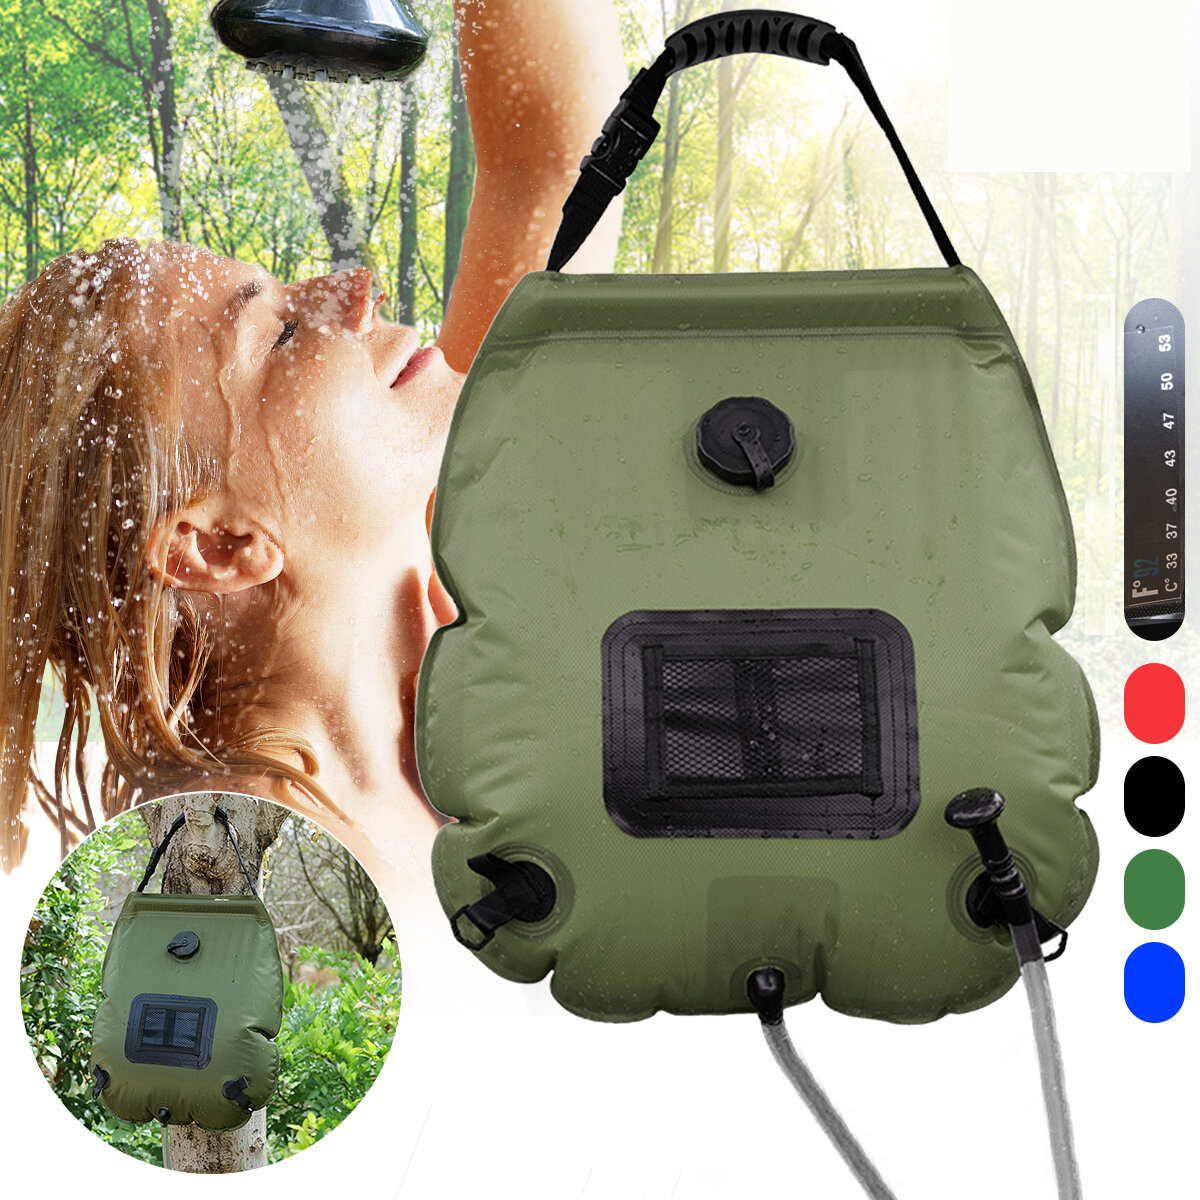 20L Portable Solar Heated Shower Water Bathing Bag Outdoor Camping Hiking Water Bag With Temperature Display Outdoor Sho